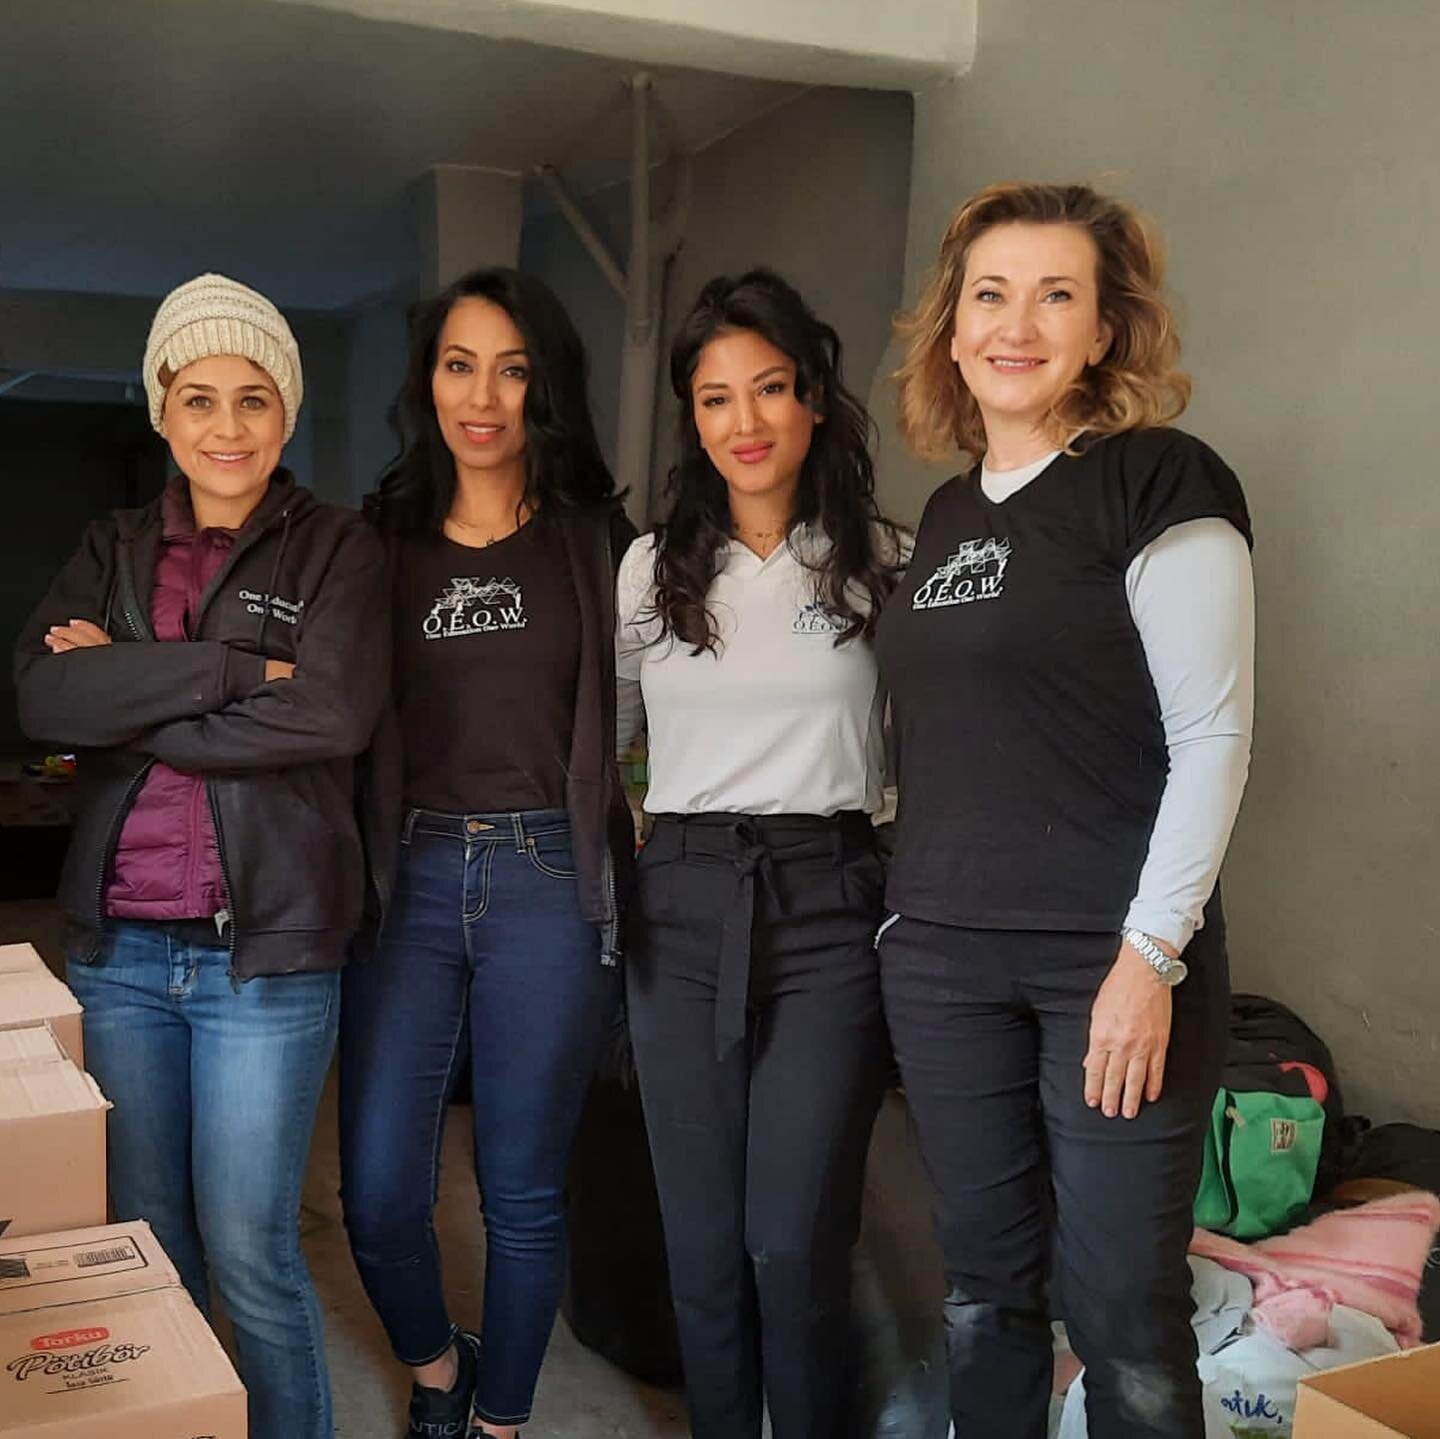 2022 started by joining this group of powerful #women to bring change. I feel so honored to be working with you @oneeducationoneworld. 6 months ago we visited #refugee camps in the Middle East for the first time. Their living situation in tents with 